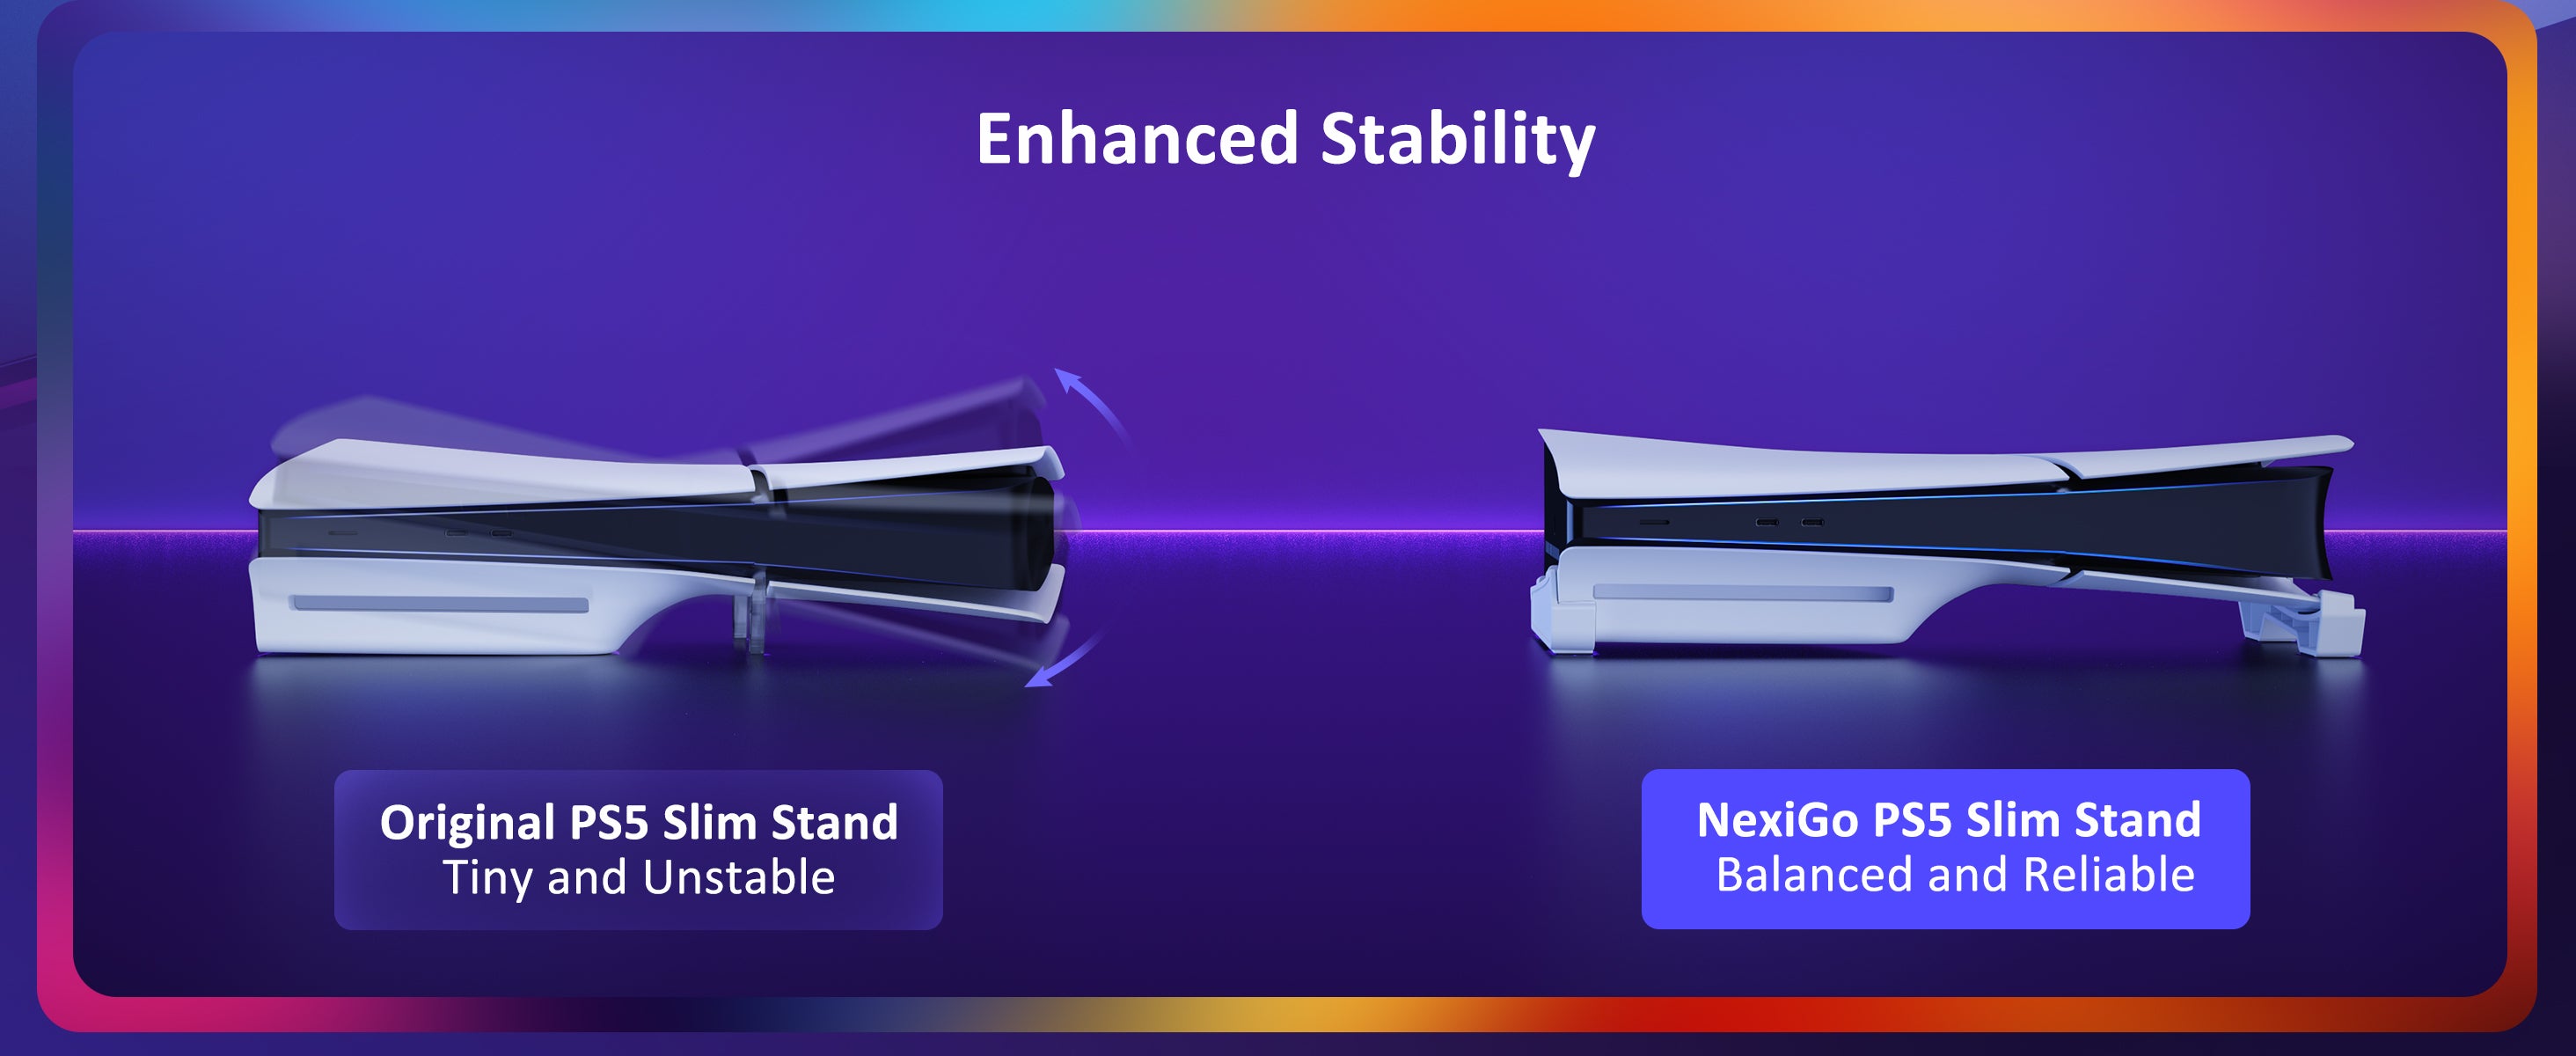 Compared to the original stand for PS5 Slim, the NexiGo stand is more stable.